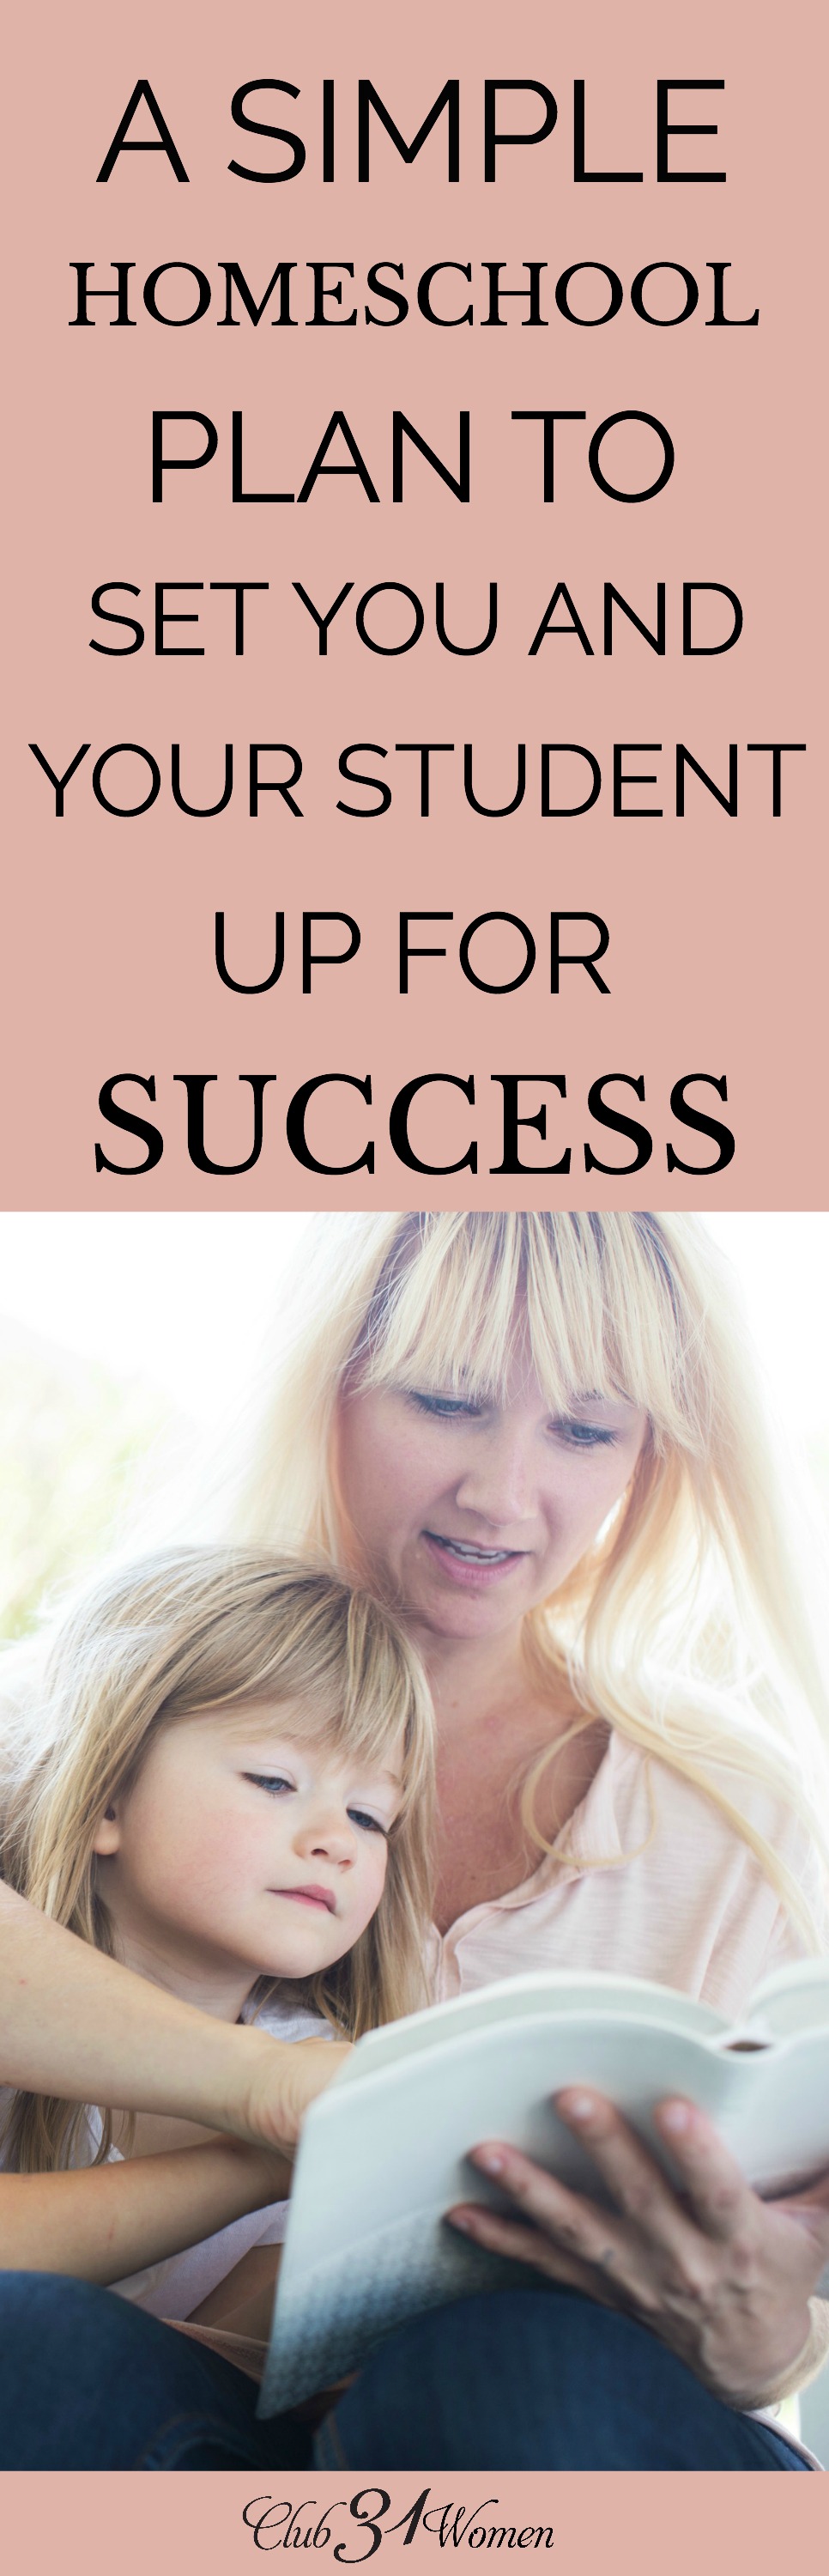 Today I'm going to take you through what a typical homeschool day looks like in our home and offer a few simple tips to help set you up for success! via @Club31Women